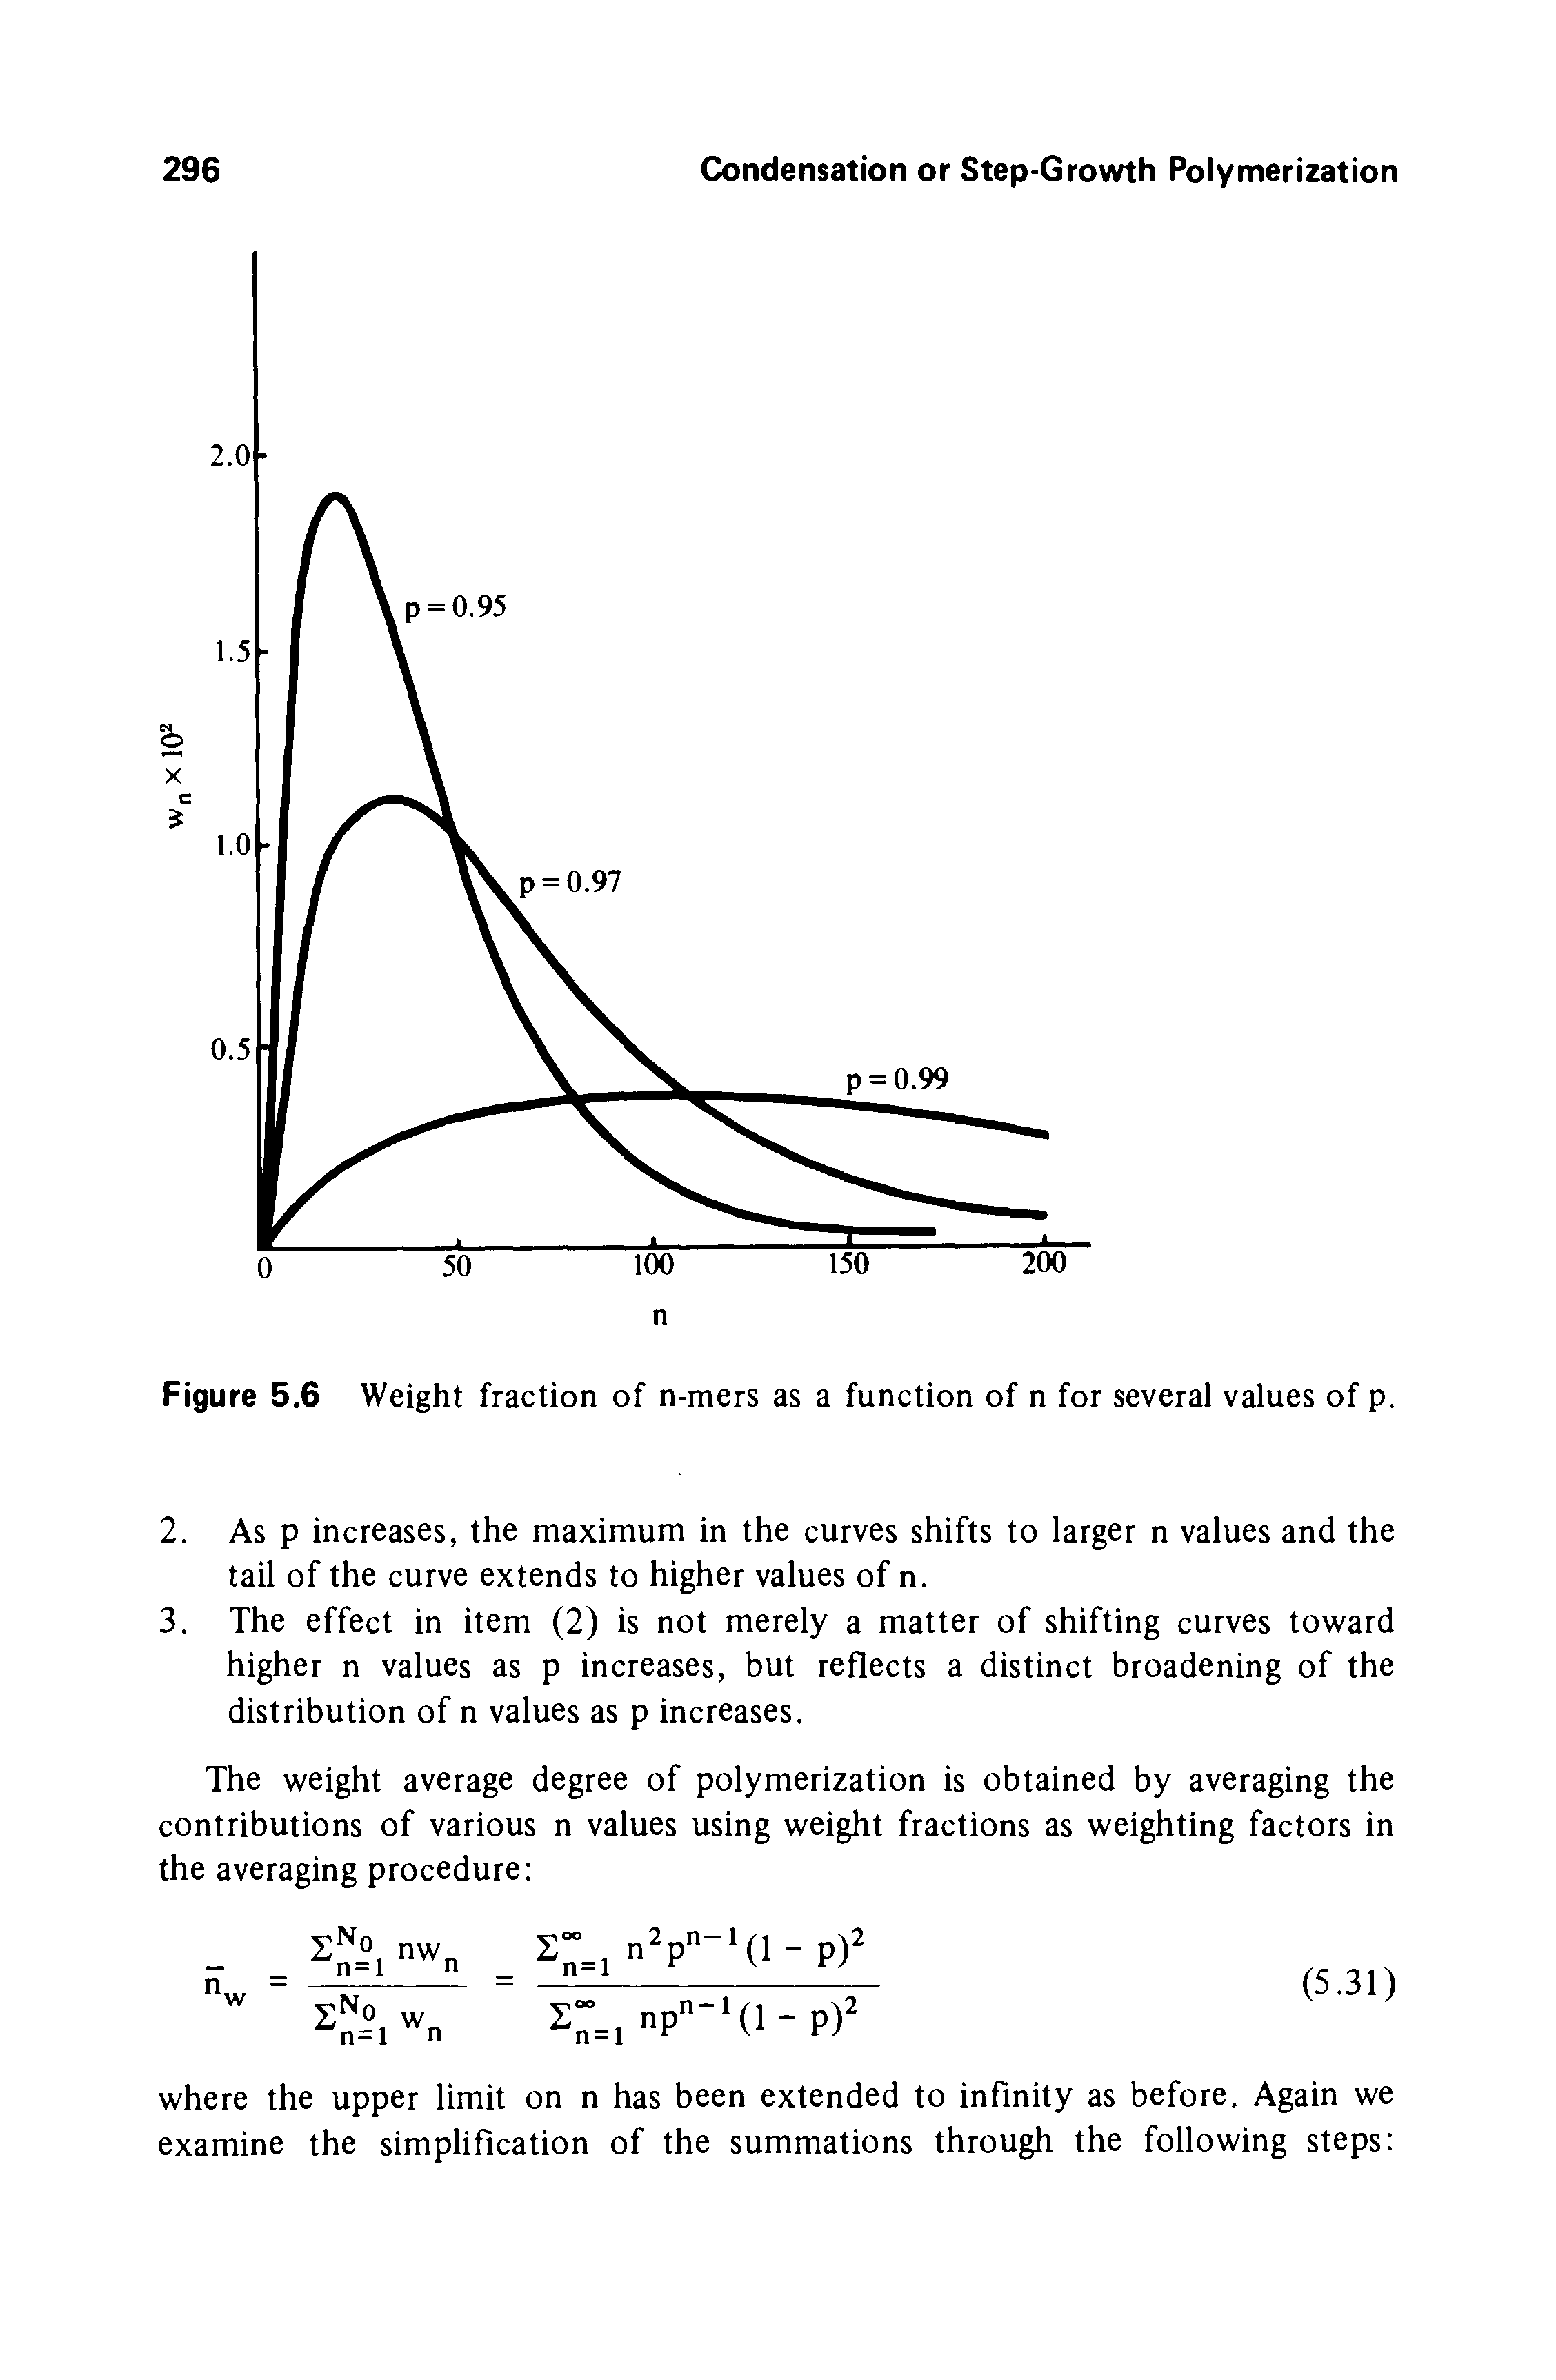 Figure 5.6 Weight fraction of n-mers as a function of n for several values of p.